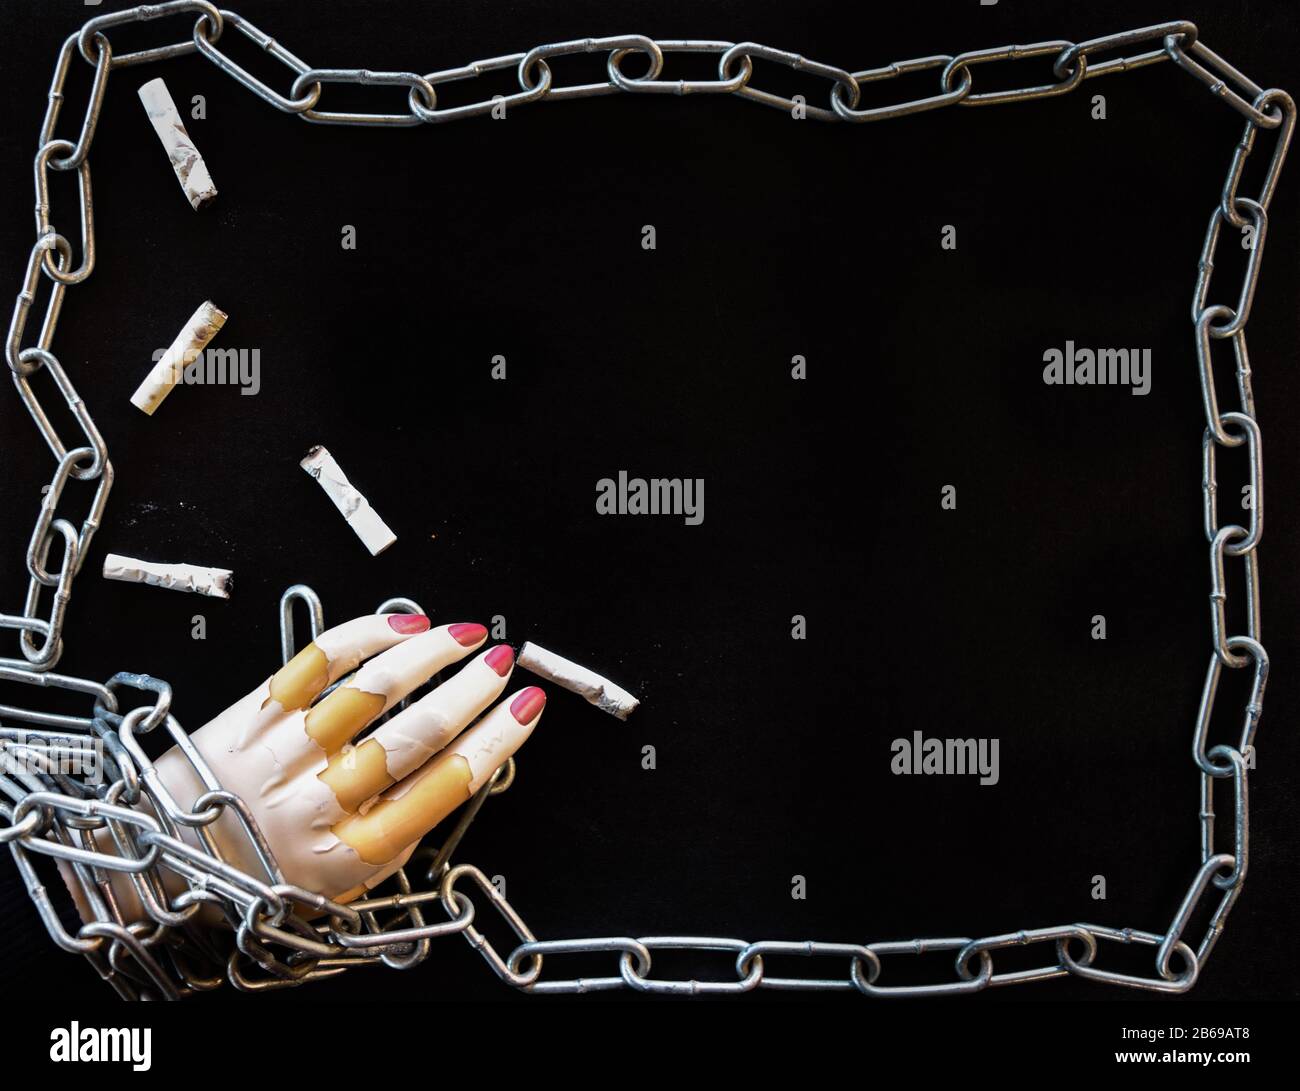 Concept with mannequin hand in chains depicting the bondage of smoking, nicotine, cigarette addiction. Stock Photo